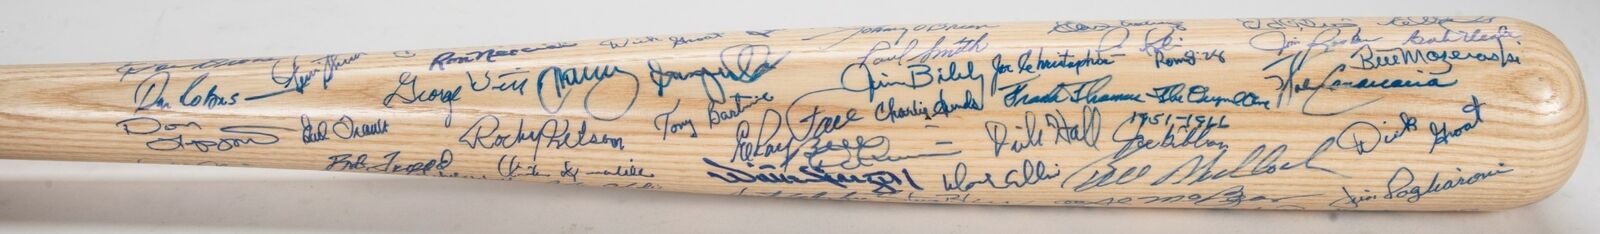 Pittsburgh Pirates Hall Of Fame & Legends Signed Bat 50 Sigs! With Beckett COA